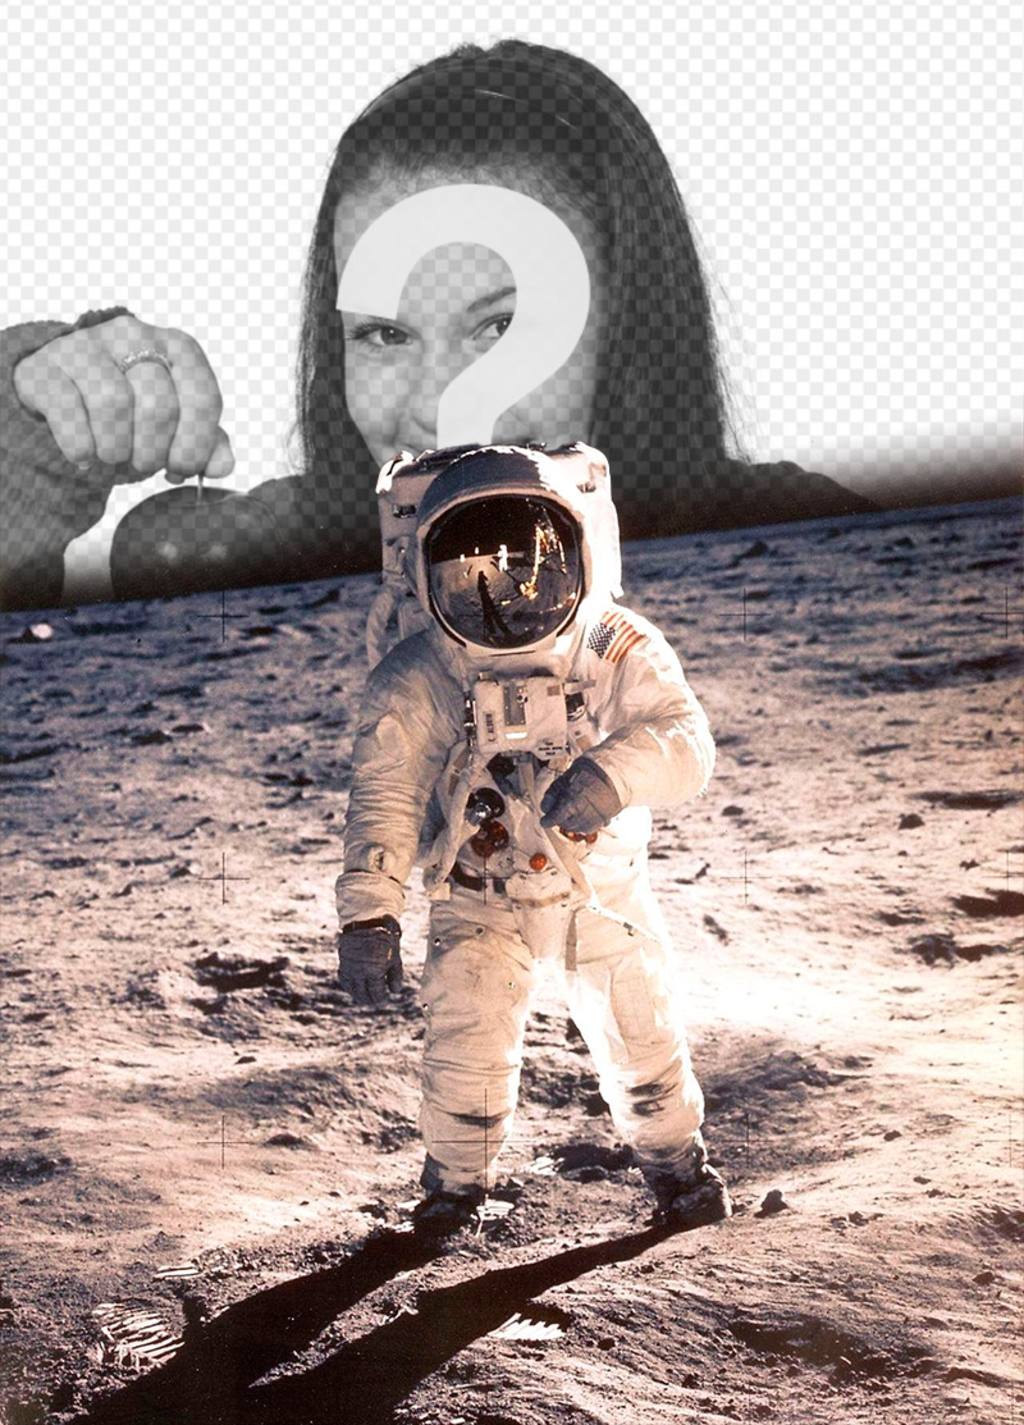 Photomontage with the famous photo of Neil Armstrong on the moon ..